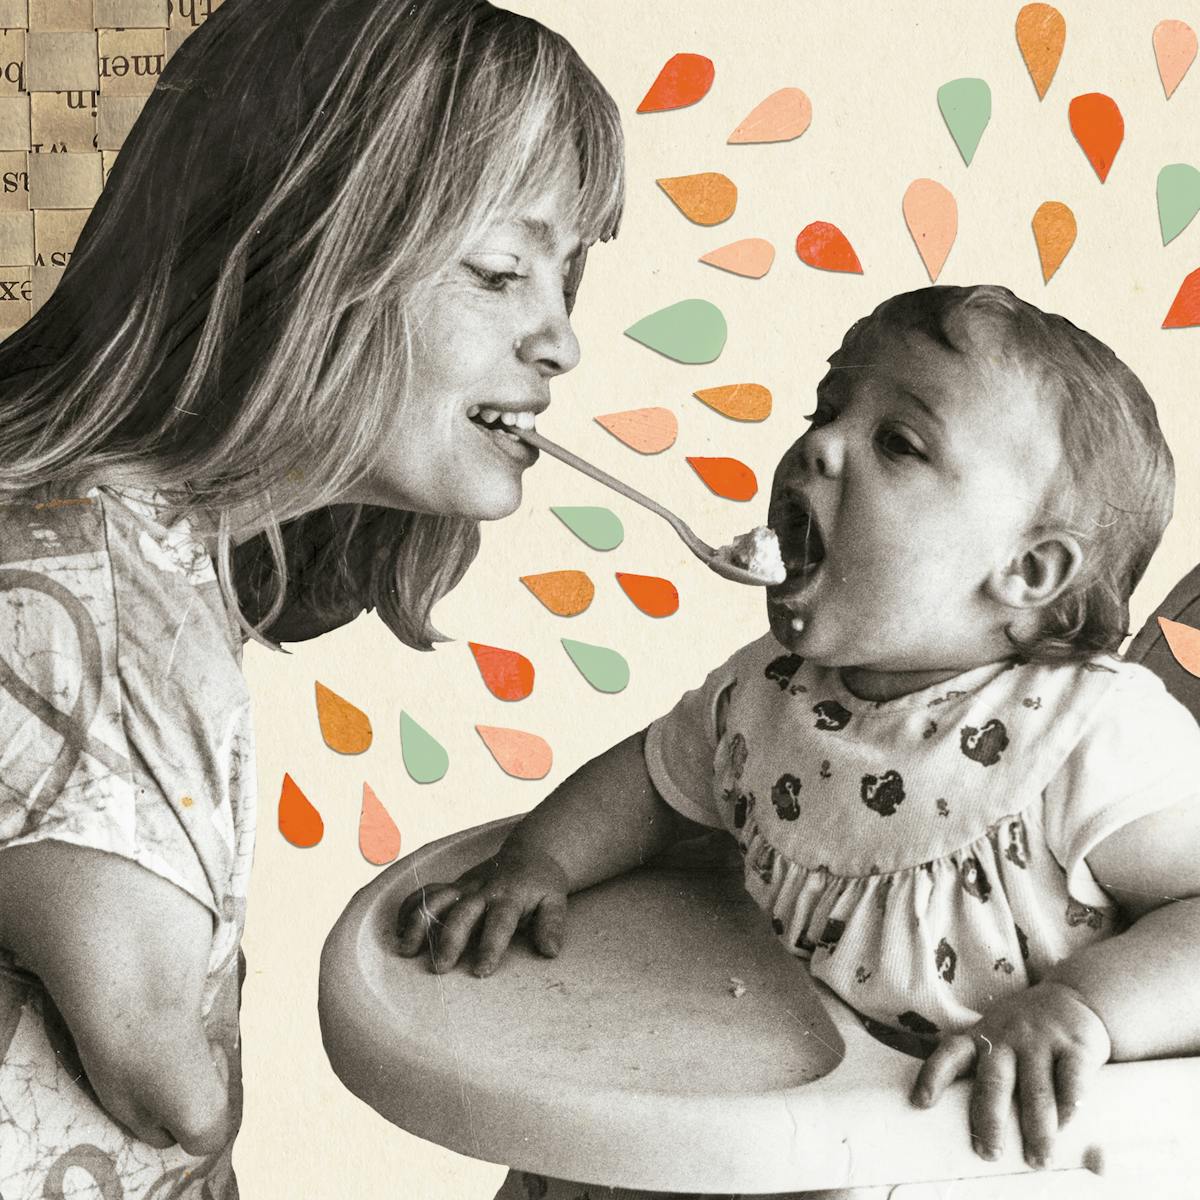 Mixed media artwork made up of an archive photograph, archive leaflets and cut out coloured shaped. The image shows a black and white sepia toned photograph which has been cut out of its original scene. The photograph shows a mother feeding her young child who is sat in a high chair. The mother is feeding the child using a spoon of food held in her mouth. The mother has short arms as a result of her mother being prescribed thalidomide when she was pregnant. The young child is leaning forward, mouth open, ready to eat from the spoon. Behind the mother to the left is a three dimensional lattice weave of an archive leaflet. The word are scrambled up but it gives a sense of texture. Radiating out from the mother's head and the child's head are droplet shaped pieces of card, resting on top of the cream background of the image. These droplets are orange, light green, pink and mustard colours. They add a sense of energy, action and joy to the image.